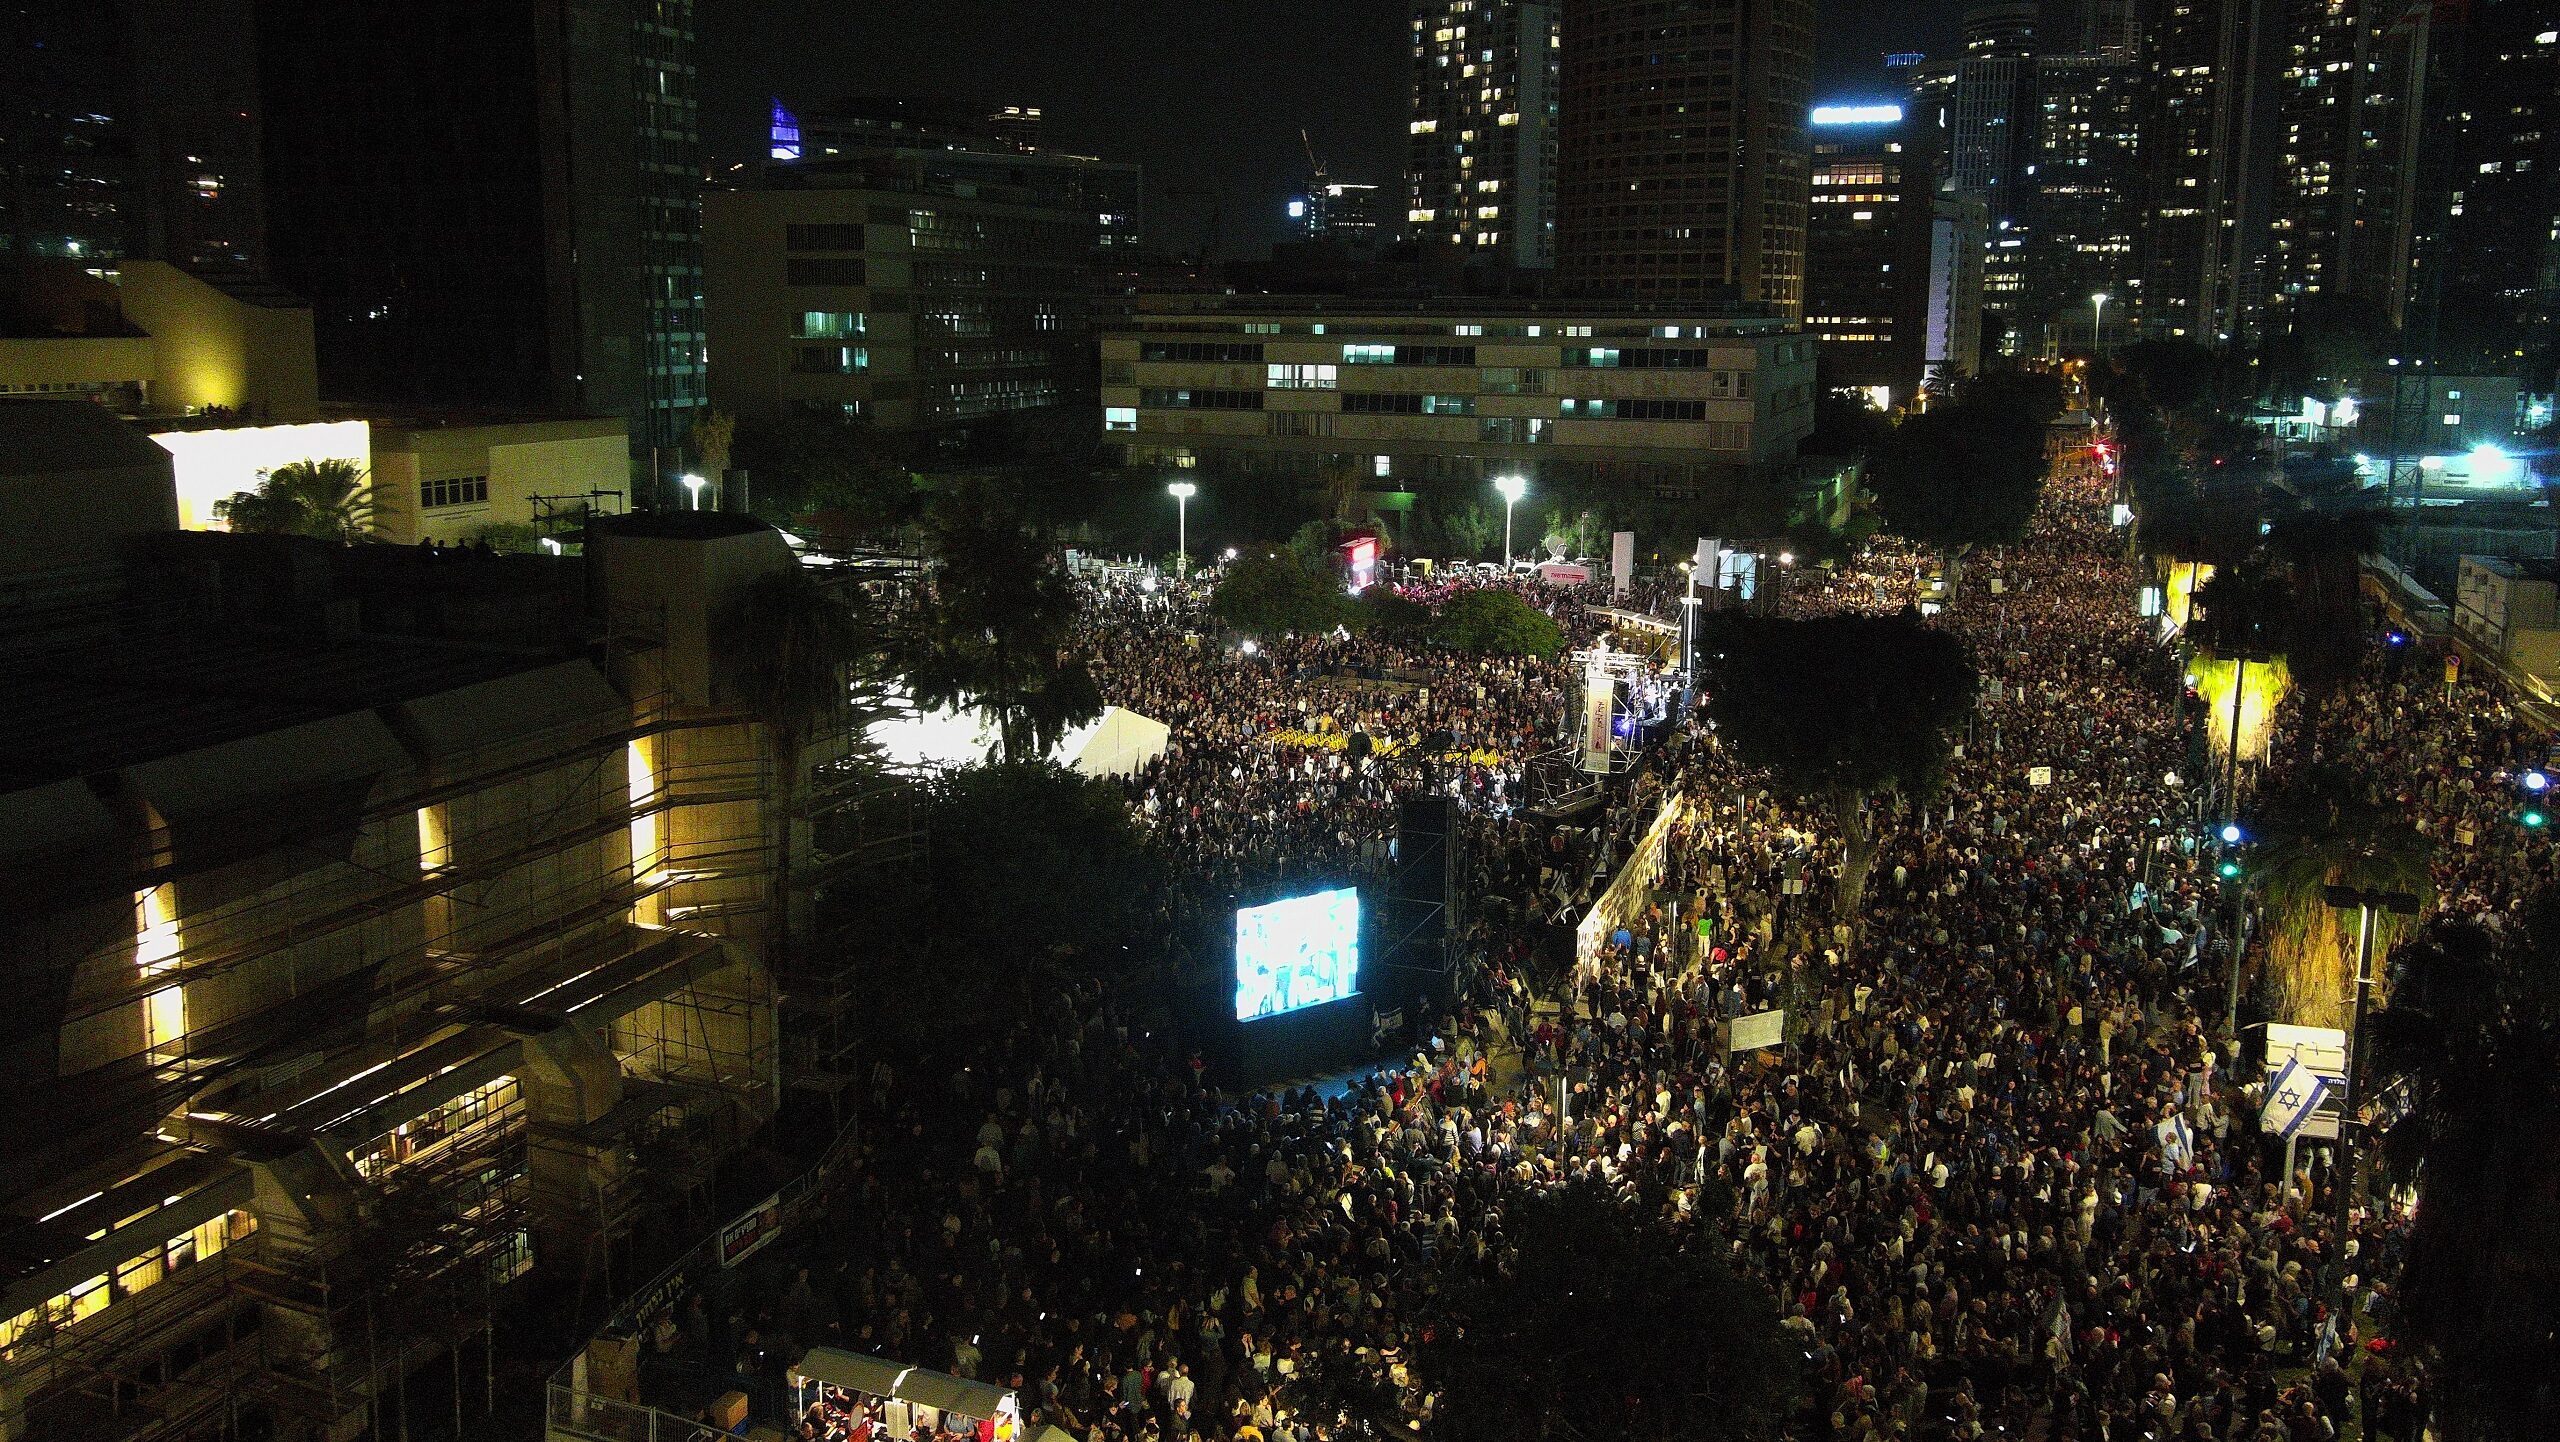 Over 100,000 Gather in Tel Aviv Demanding Release of Hostages Held by Hamas